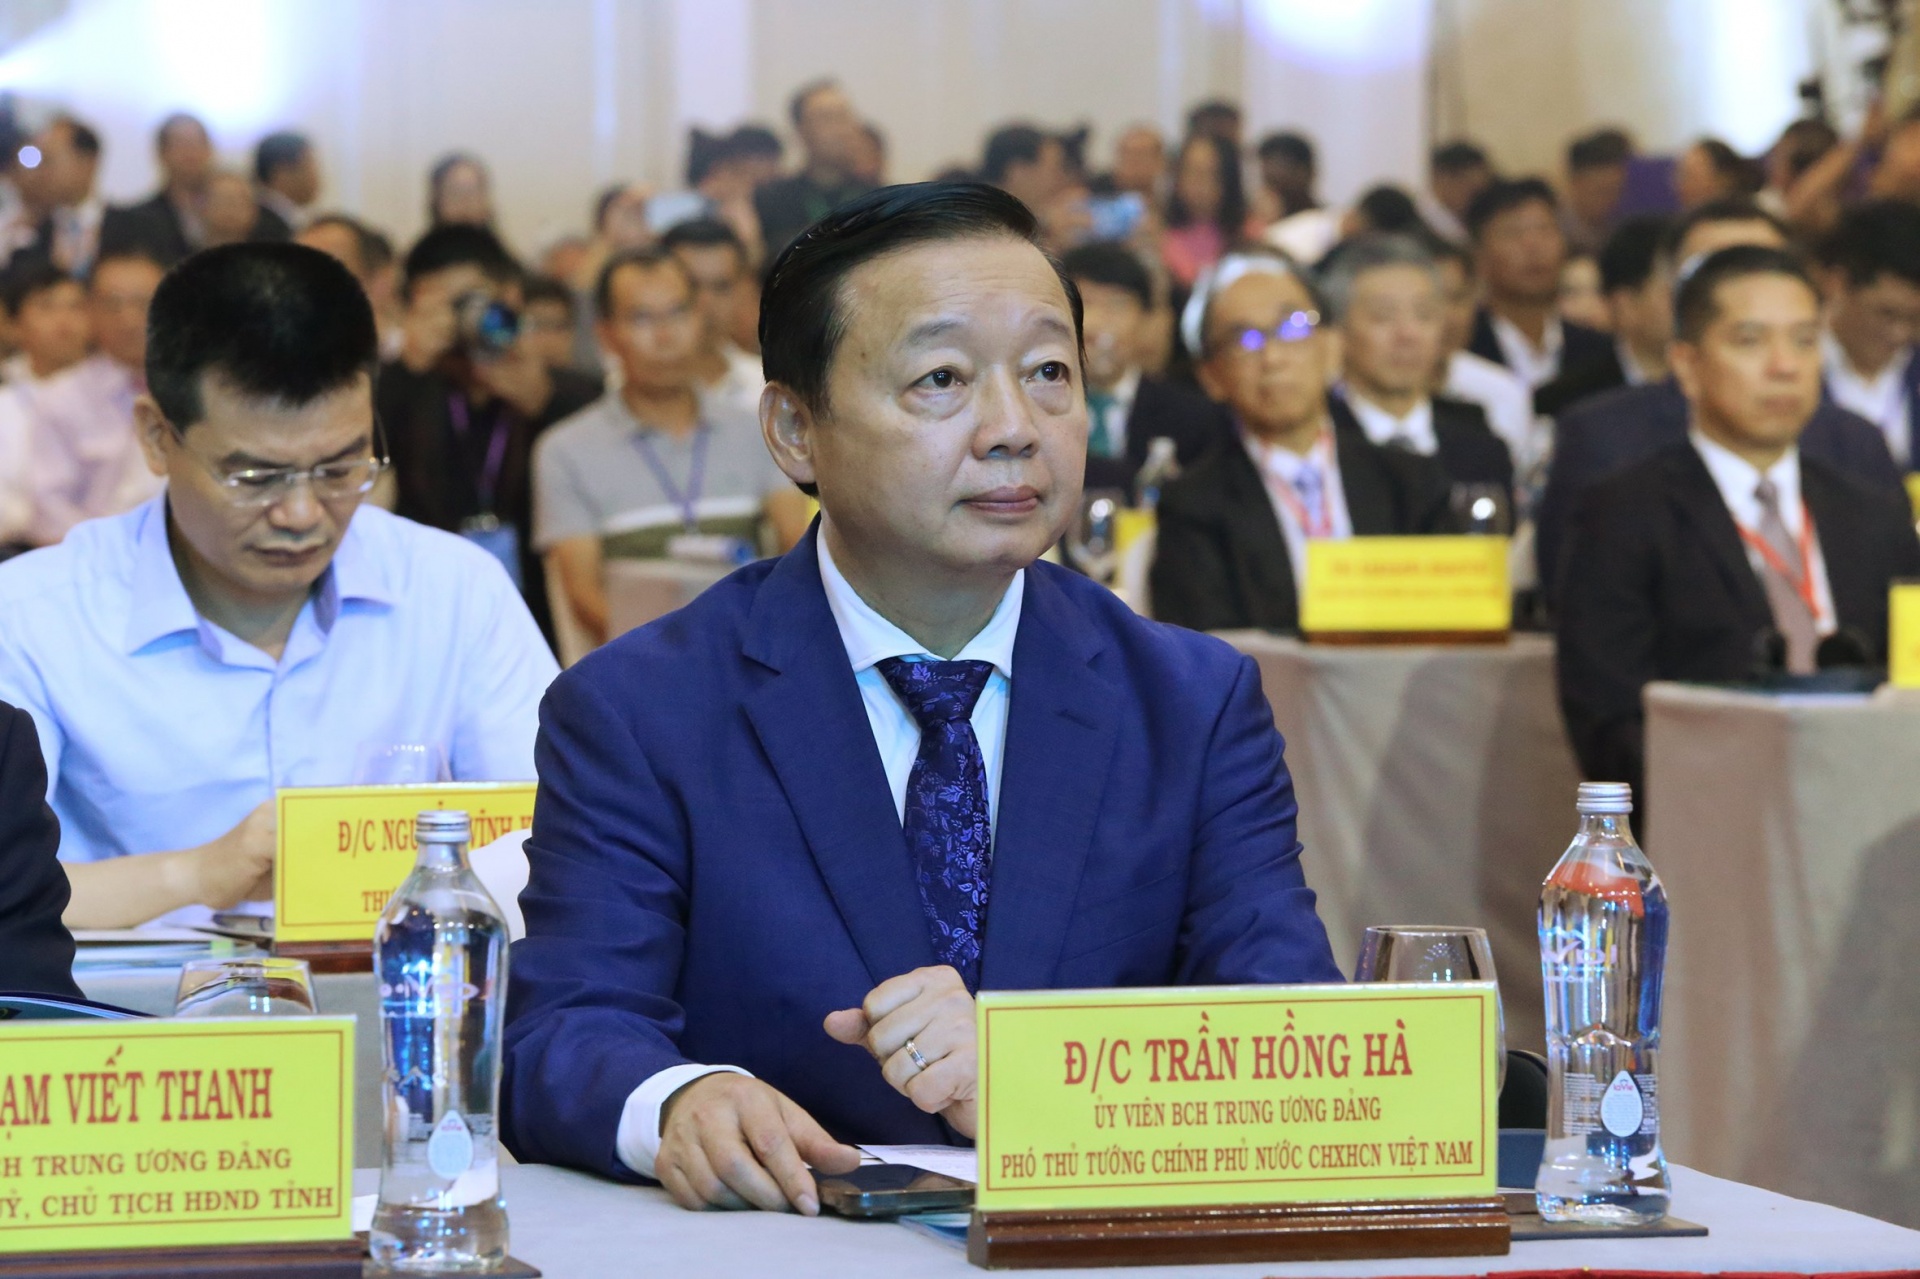 Ba Ria-Vung Tau hosts conference to introduce provincial plan